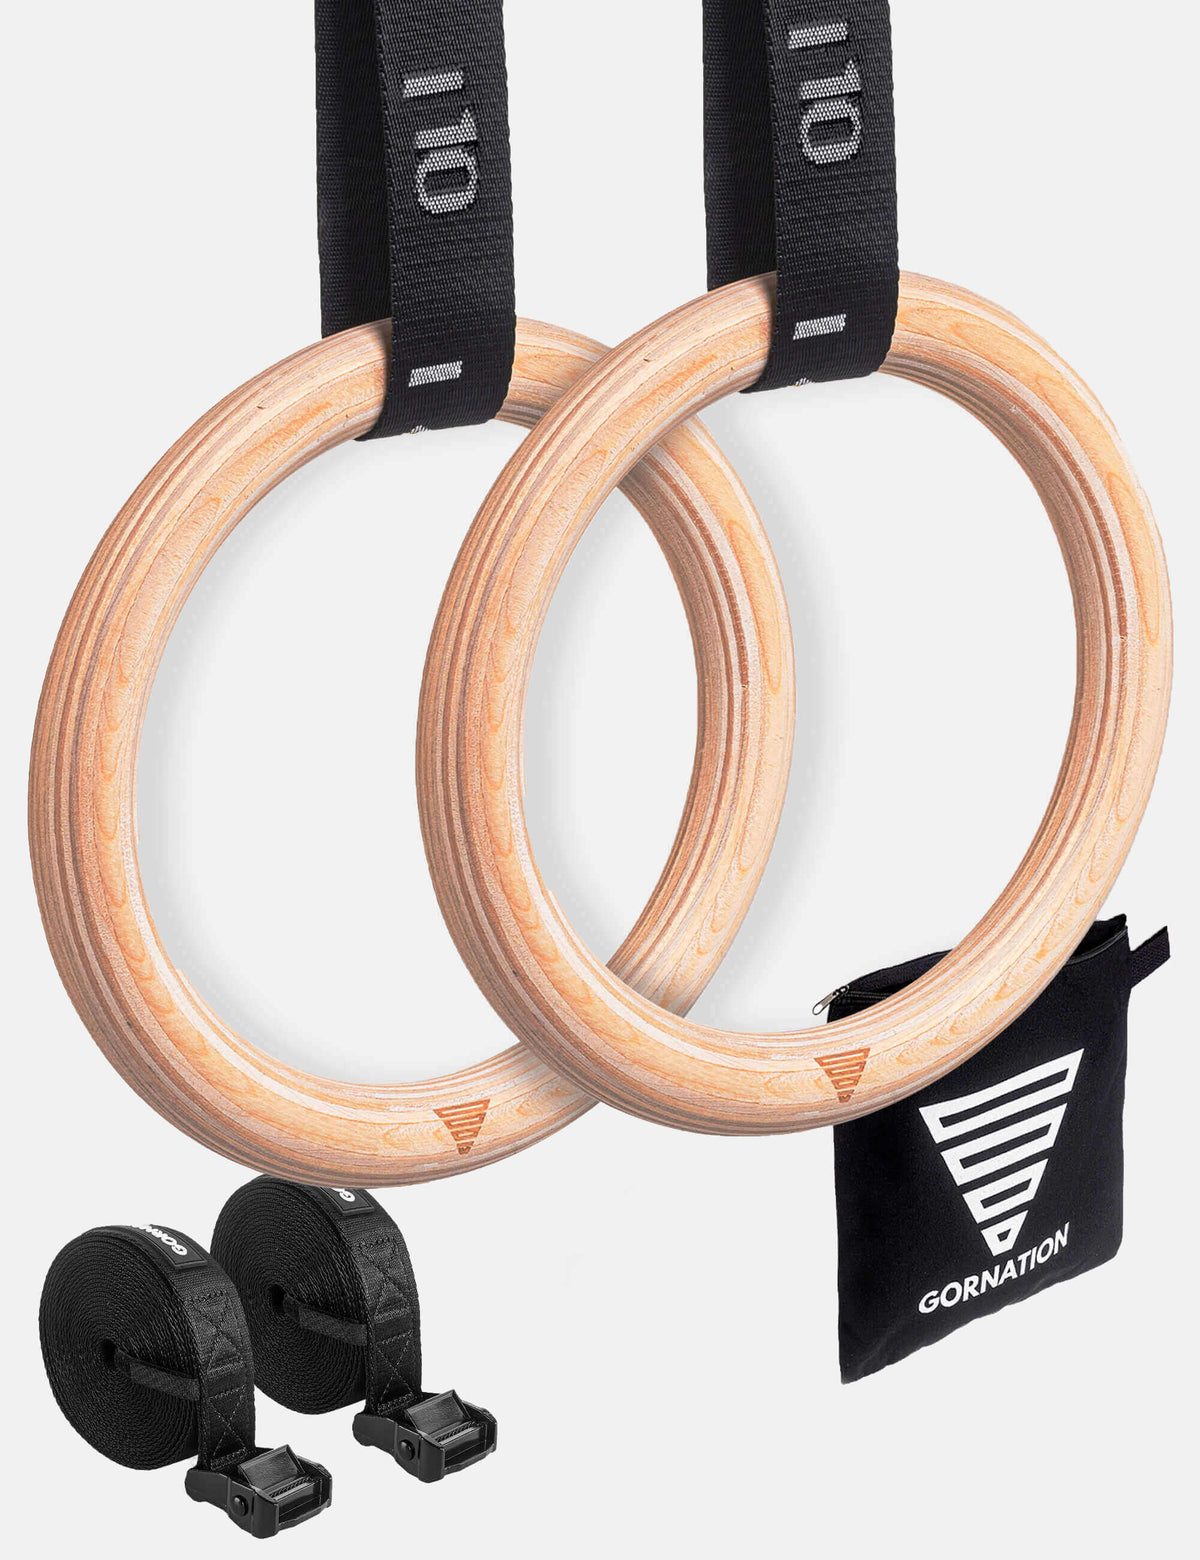 GND Wooden Gymnastic Rings W/ Nylon Bracing Straps | GND Fitness